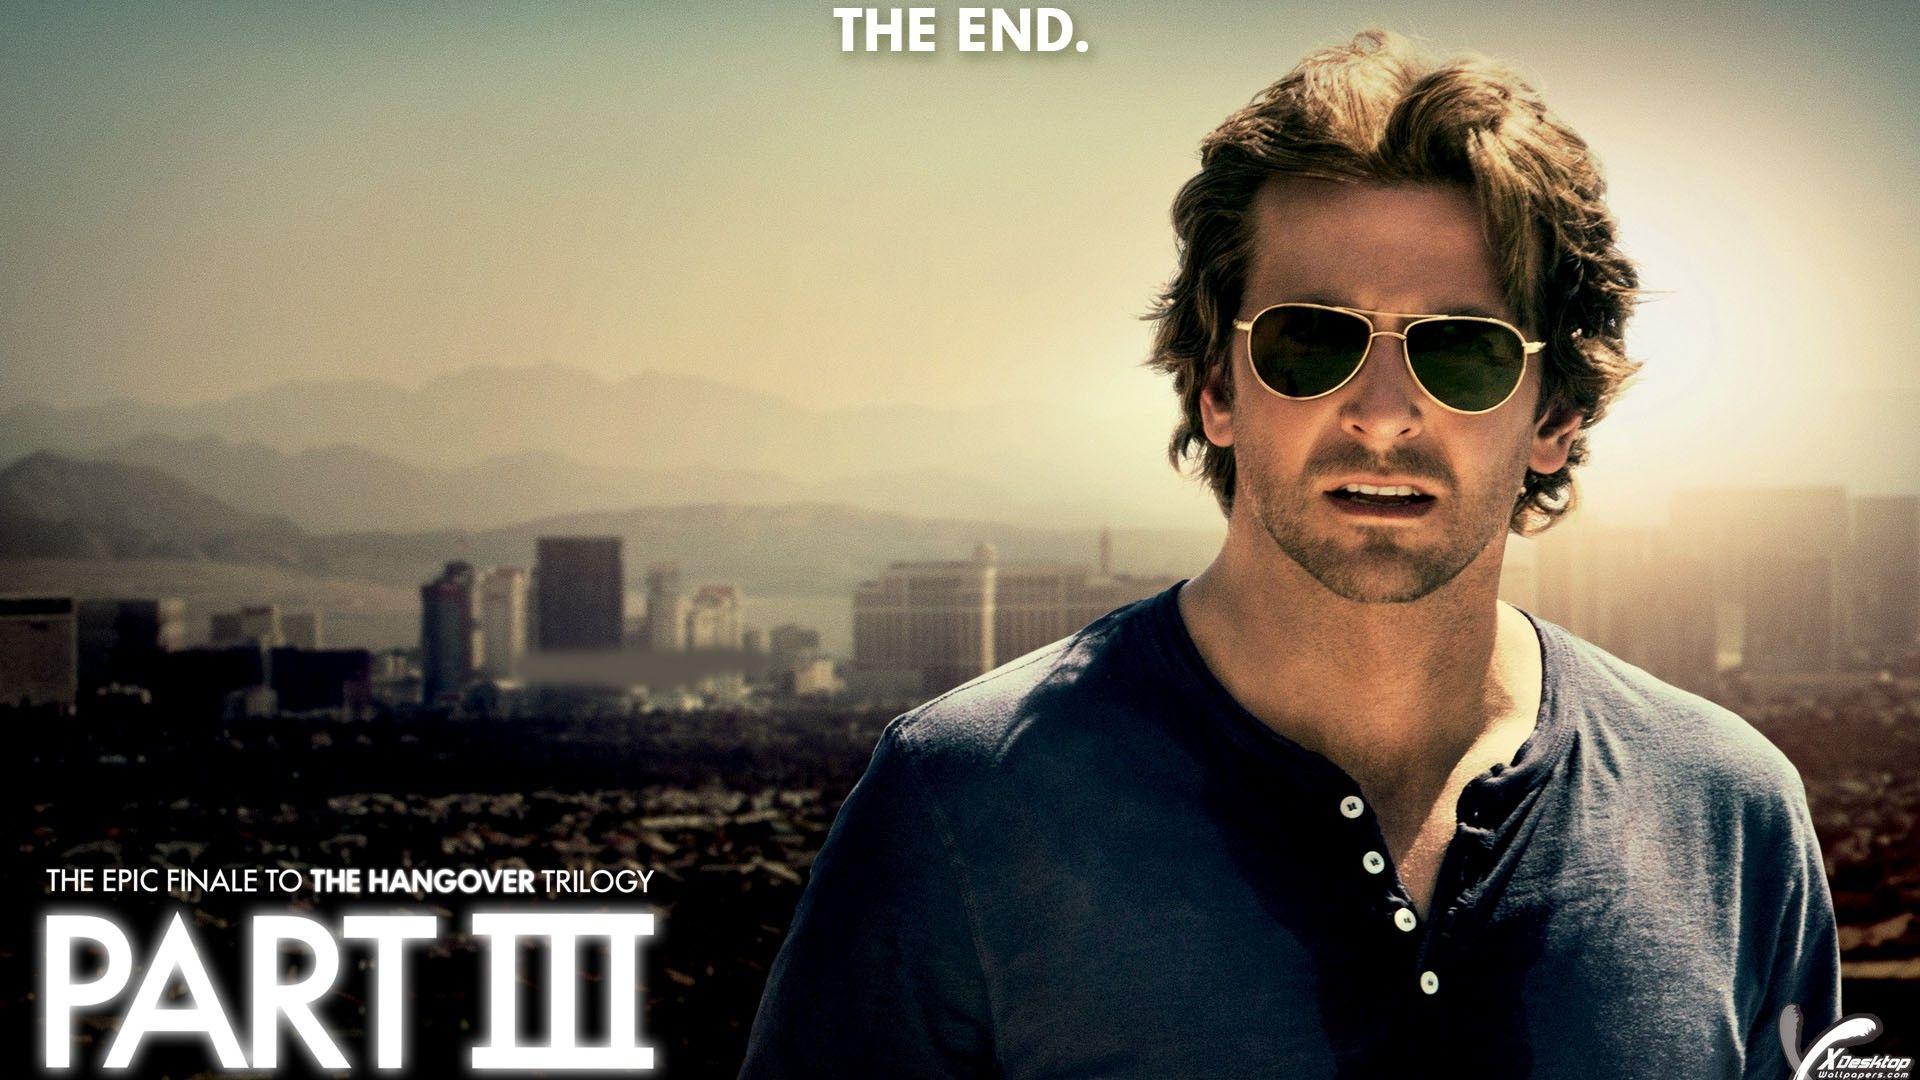 The Hangover Part 3 Wallpaper, Photo & Image in HD